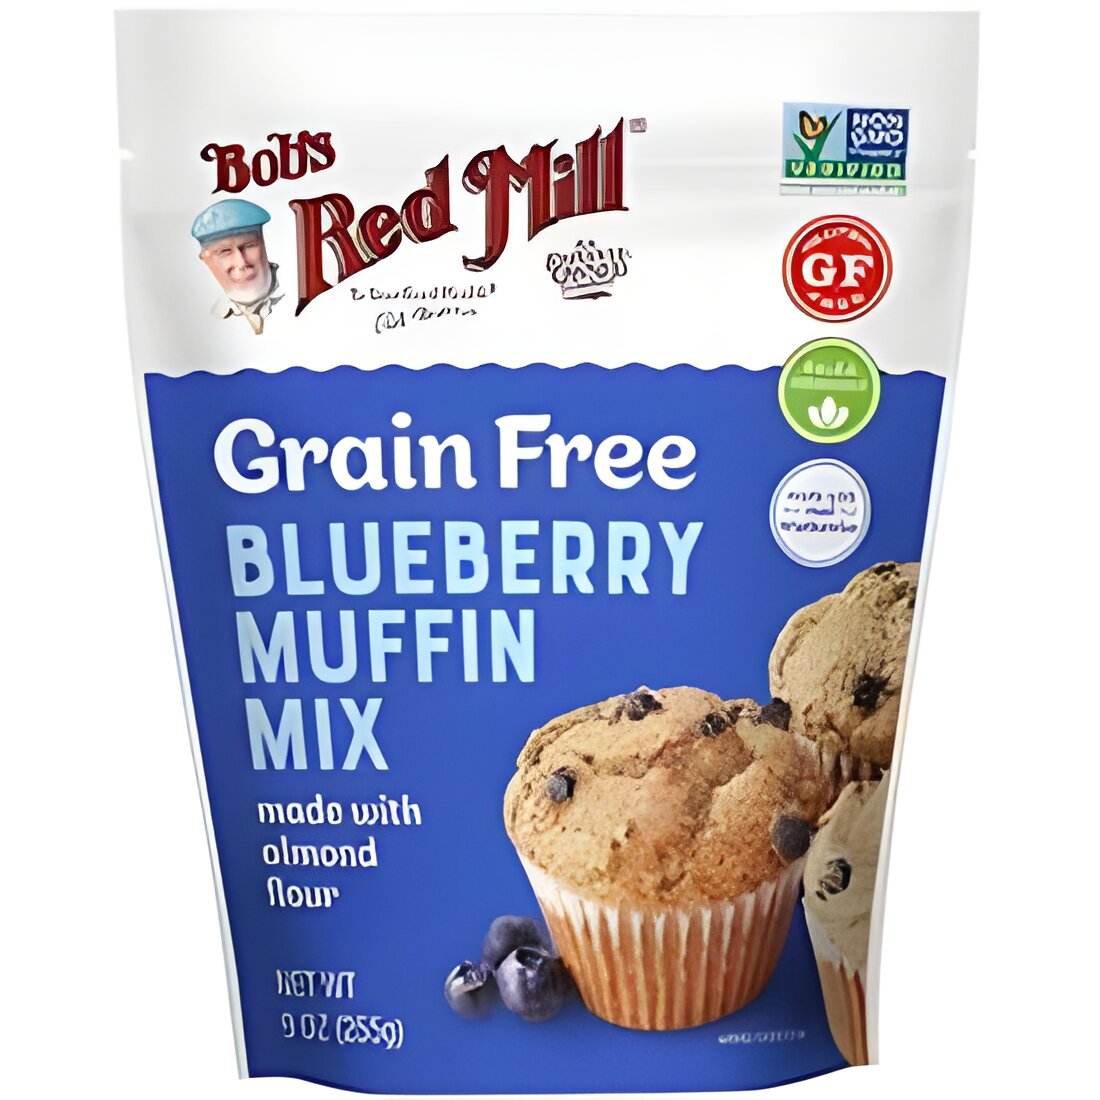 Free Bob's Red Mill Grain Free Blueberry Muffin Mix